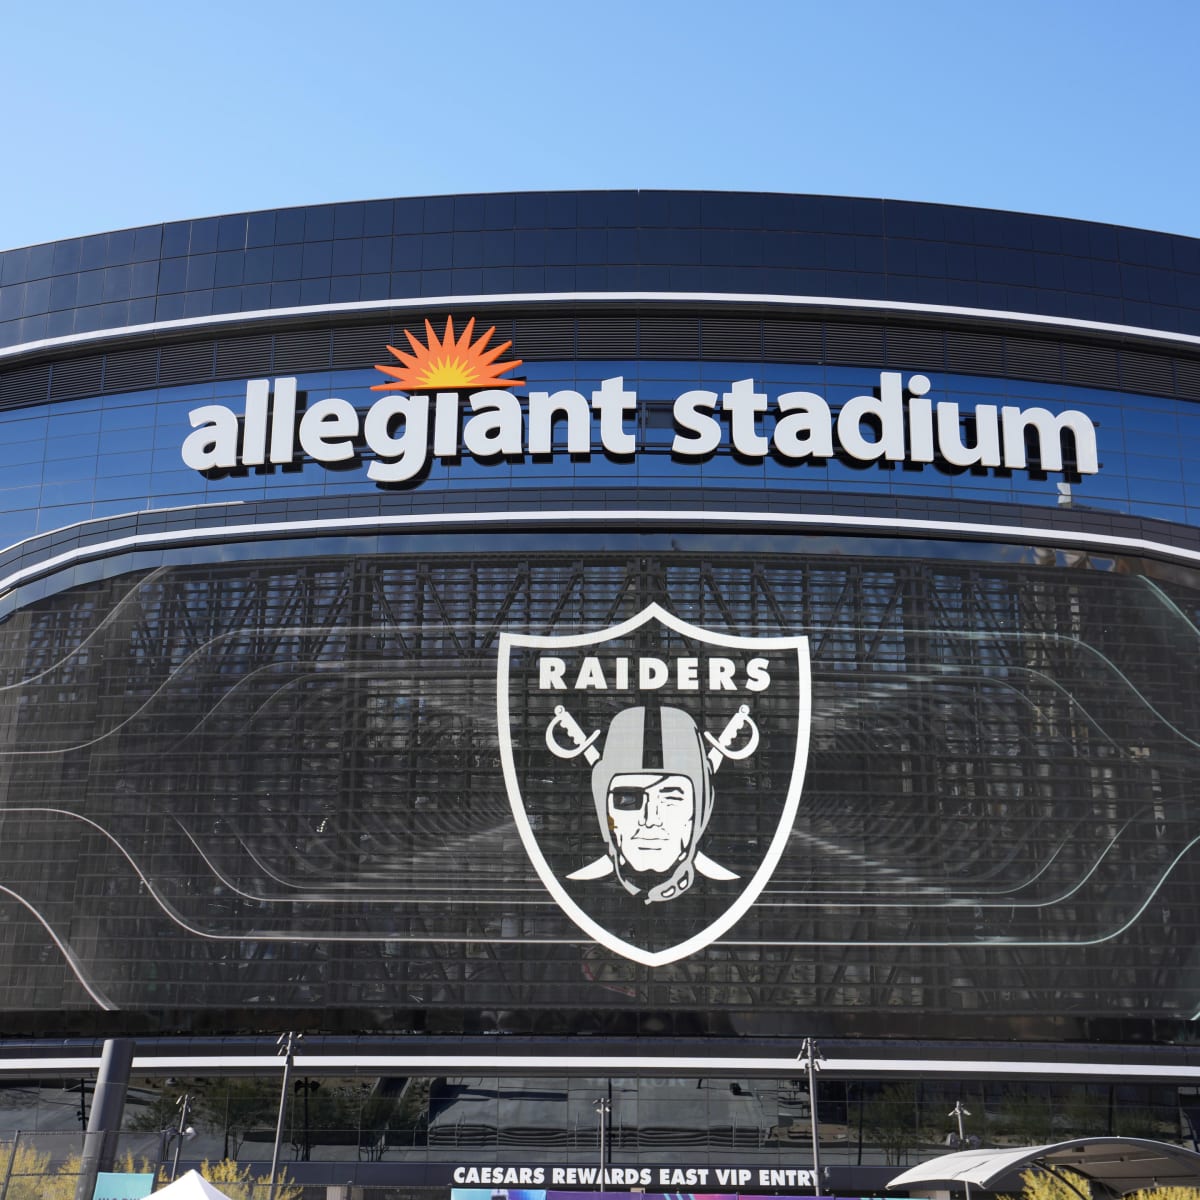 How to Watch and Listen, Las Vegas Raiders